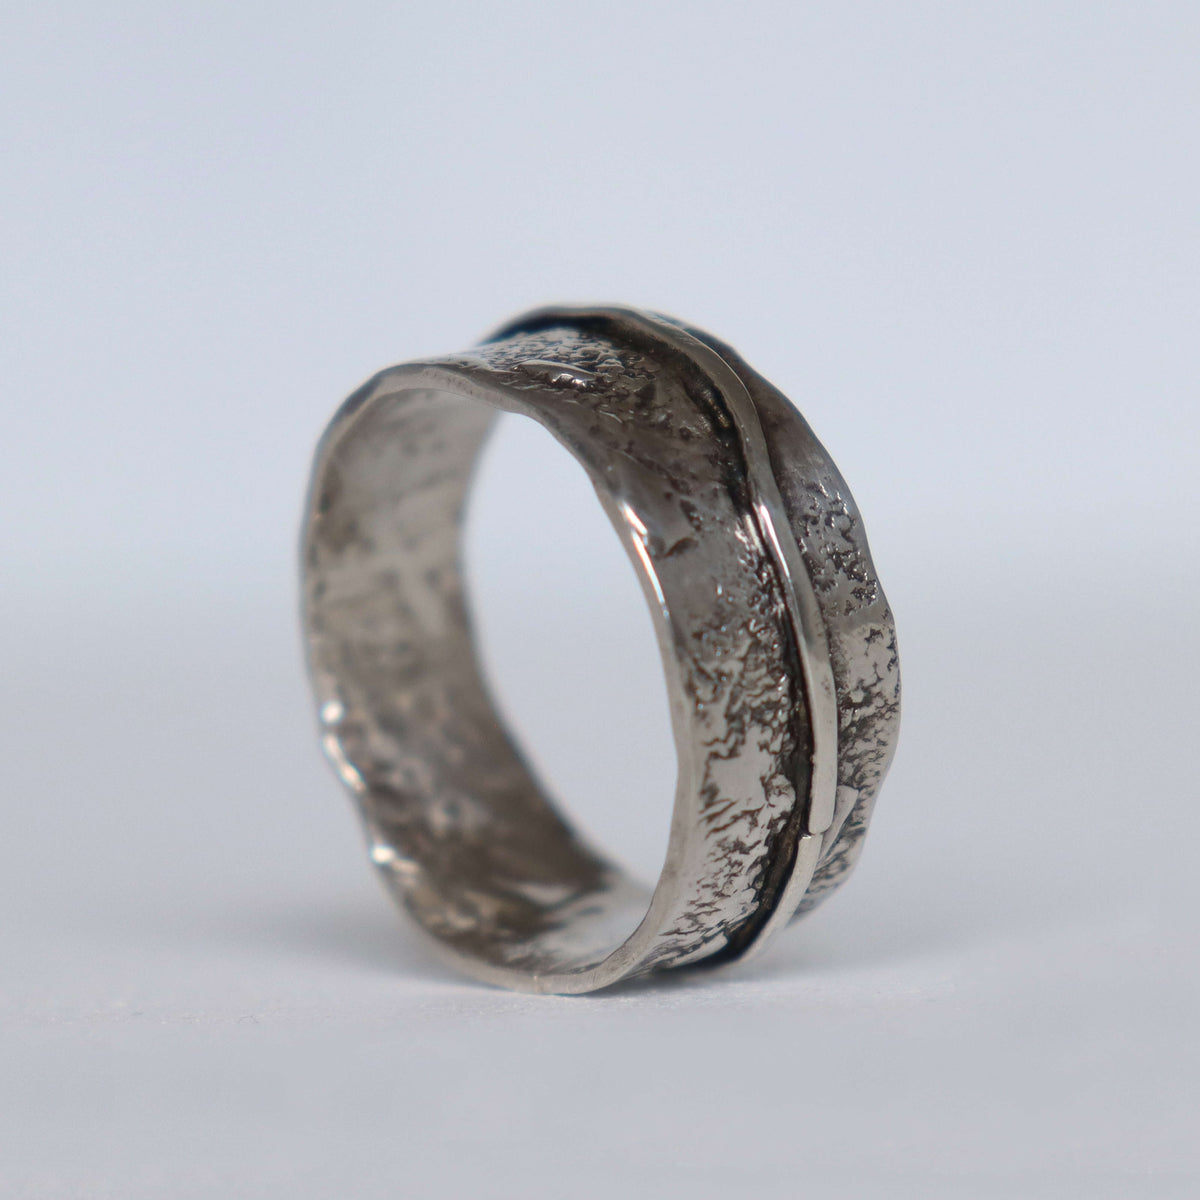 Chunky ring for men, minimalist silver ring with texture and patterns, handmade ring roffjewellery